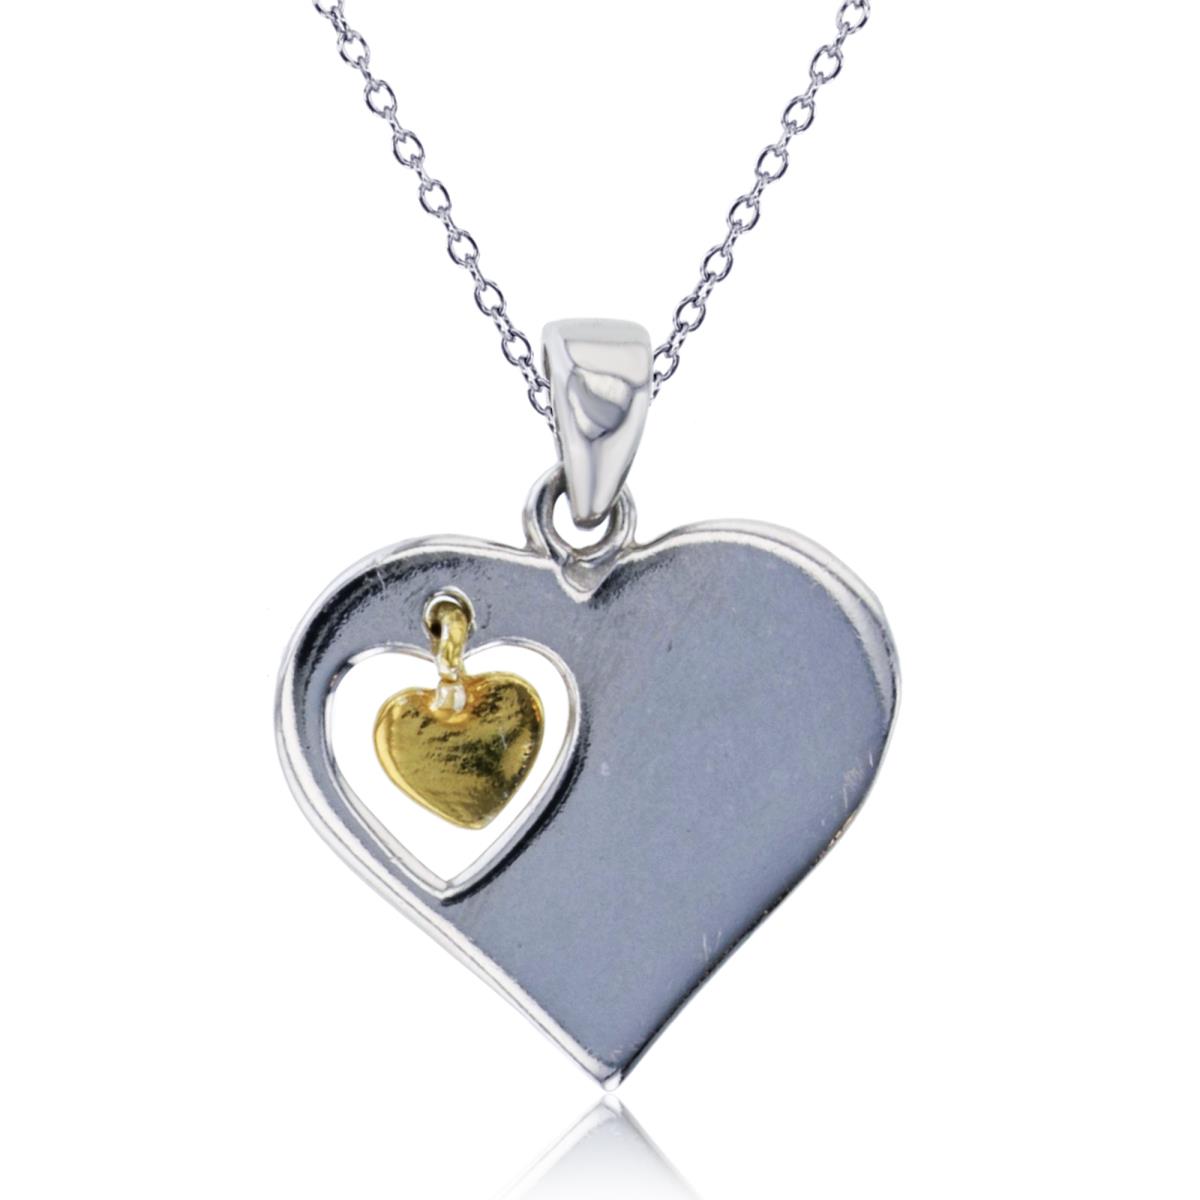 Sterling Silver Two-Tone Polished Heart with Dangling Small Heart 18"Necklace